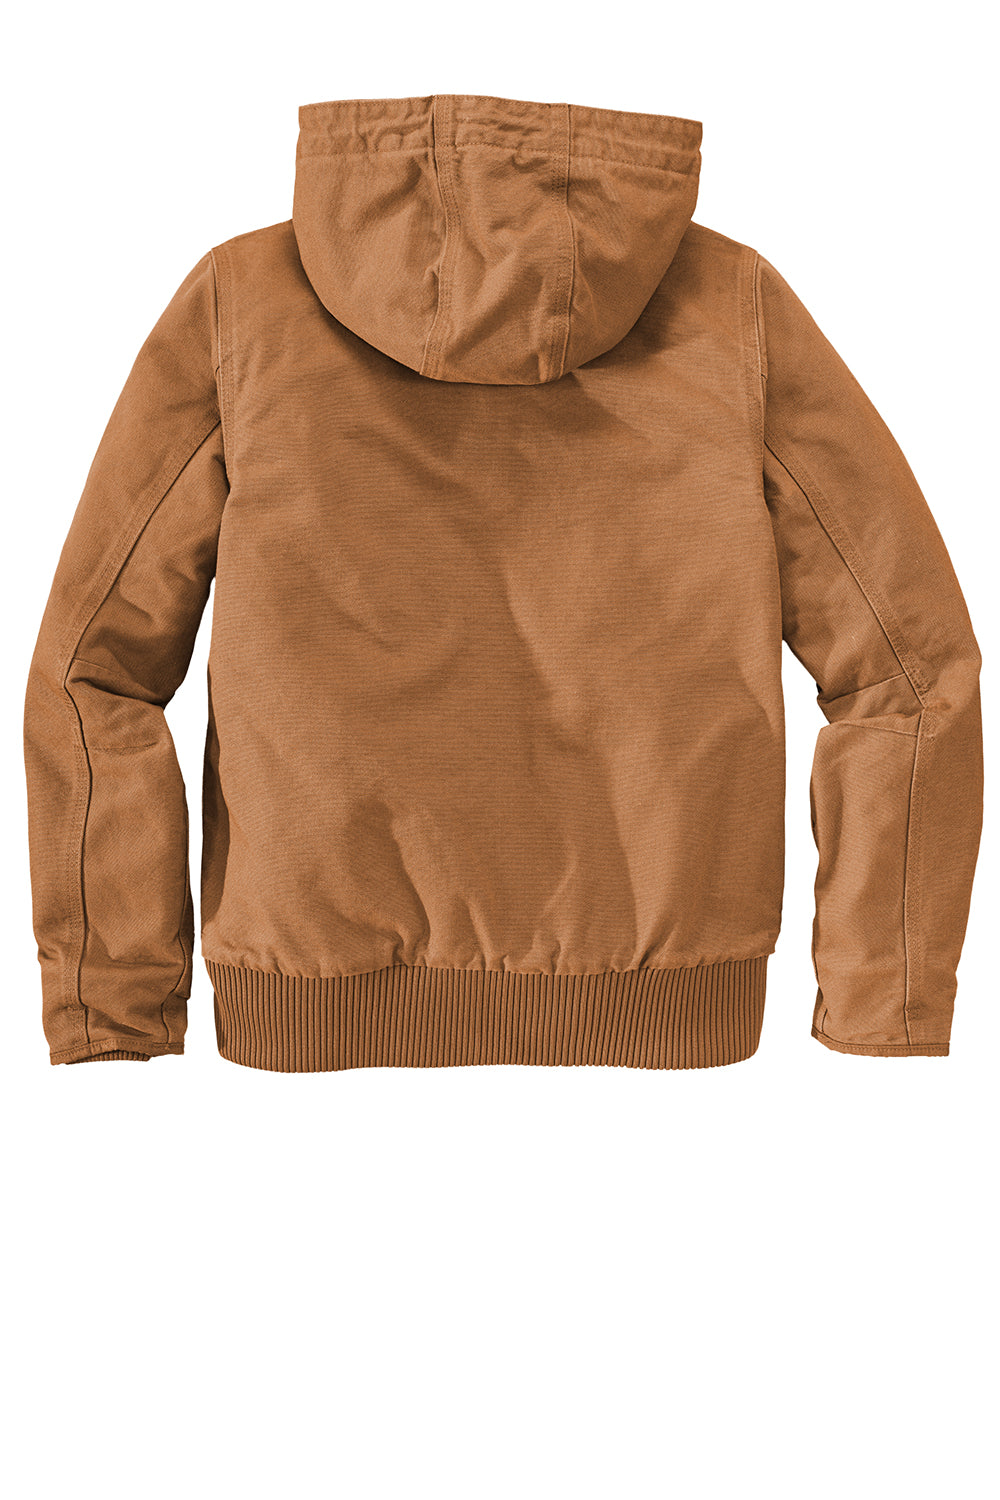 Carhartt CT104053 Womens Active Washed Duck Full Zip Hooded Jacket Carhartt Brown Flat Back